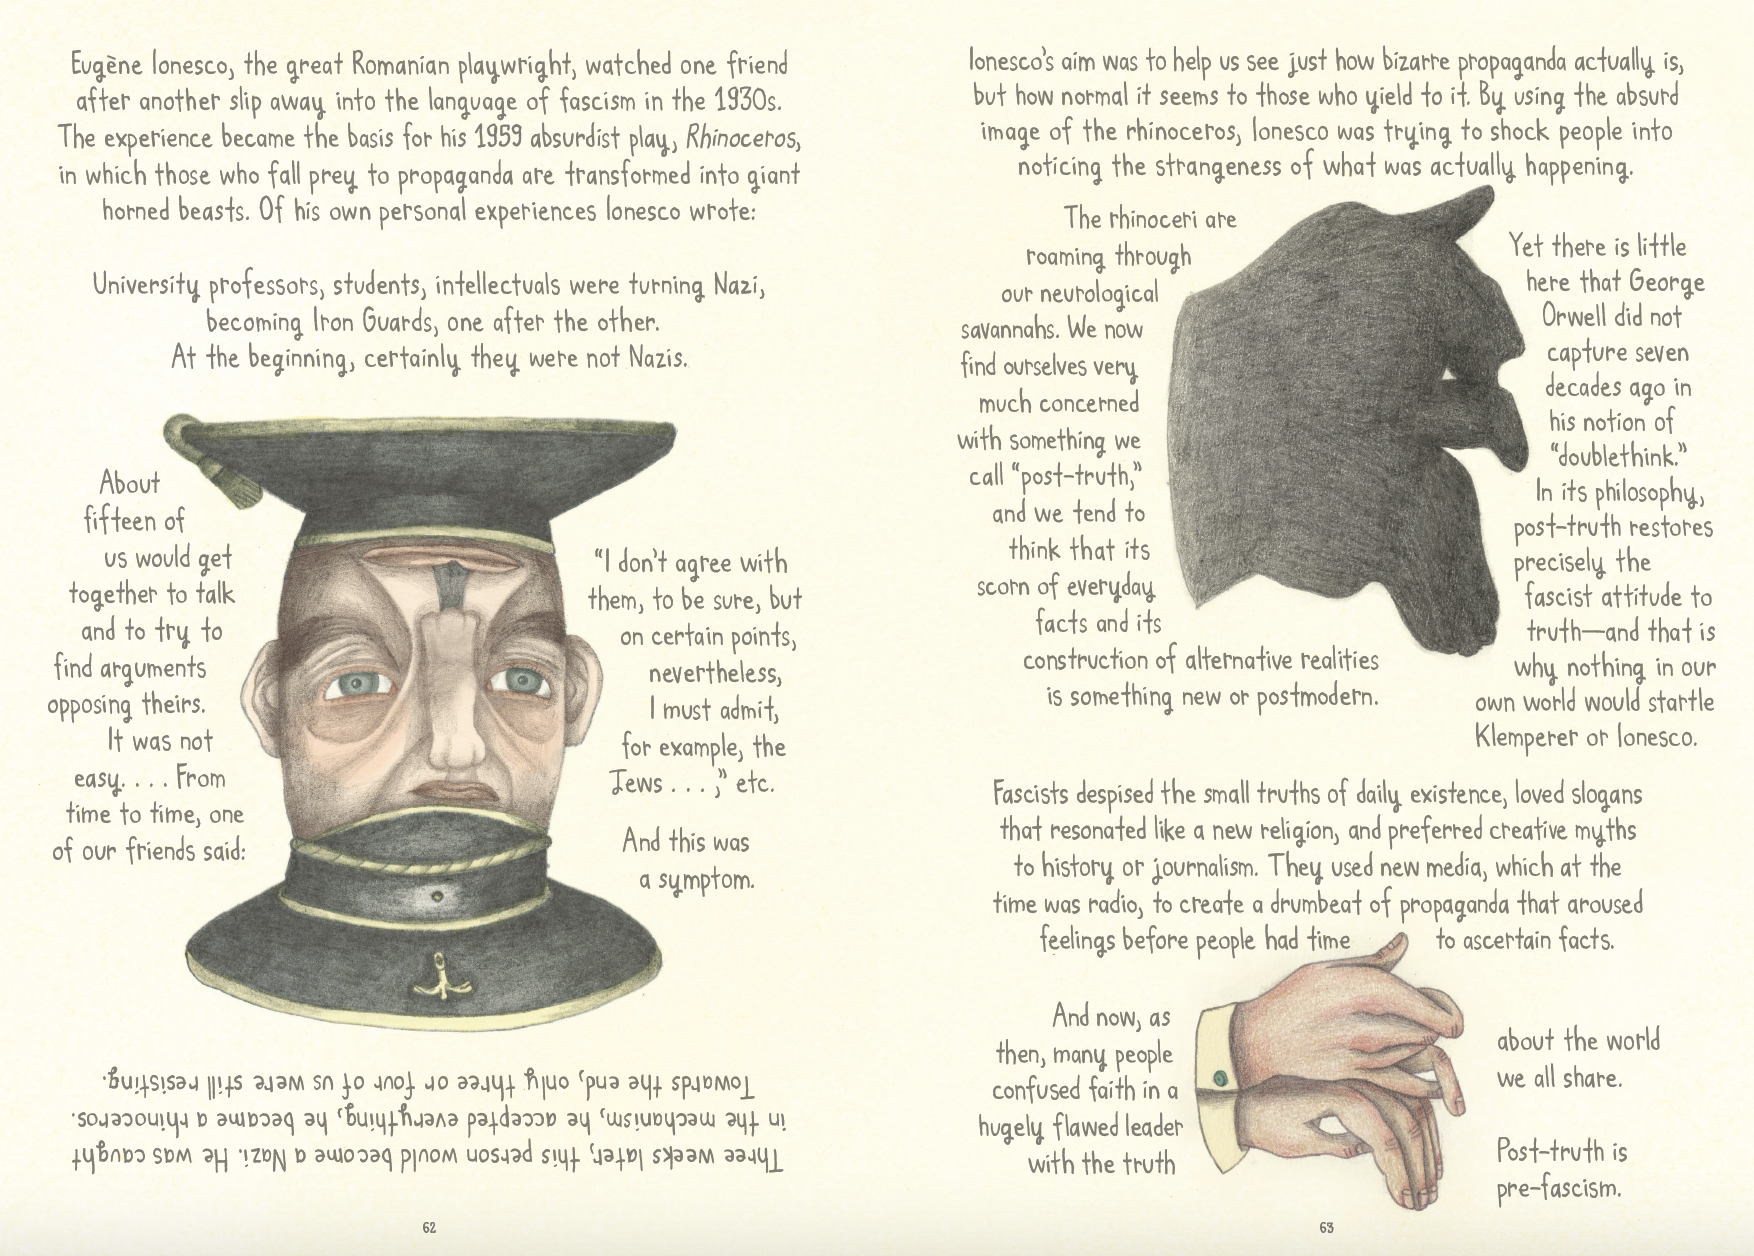 A page of an art book with drawings and text.